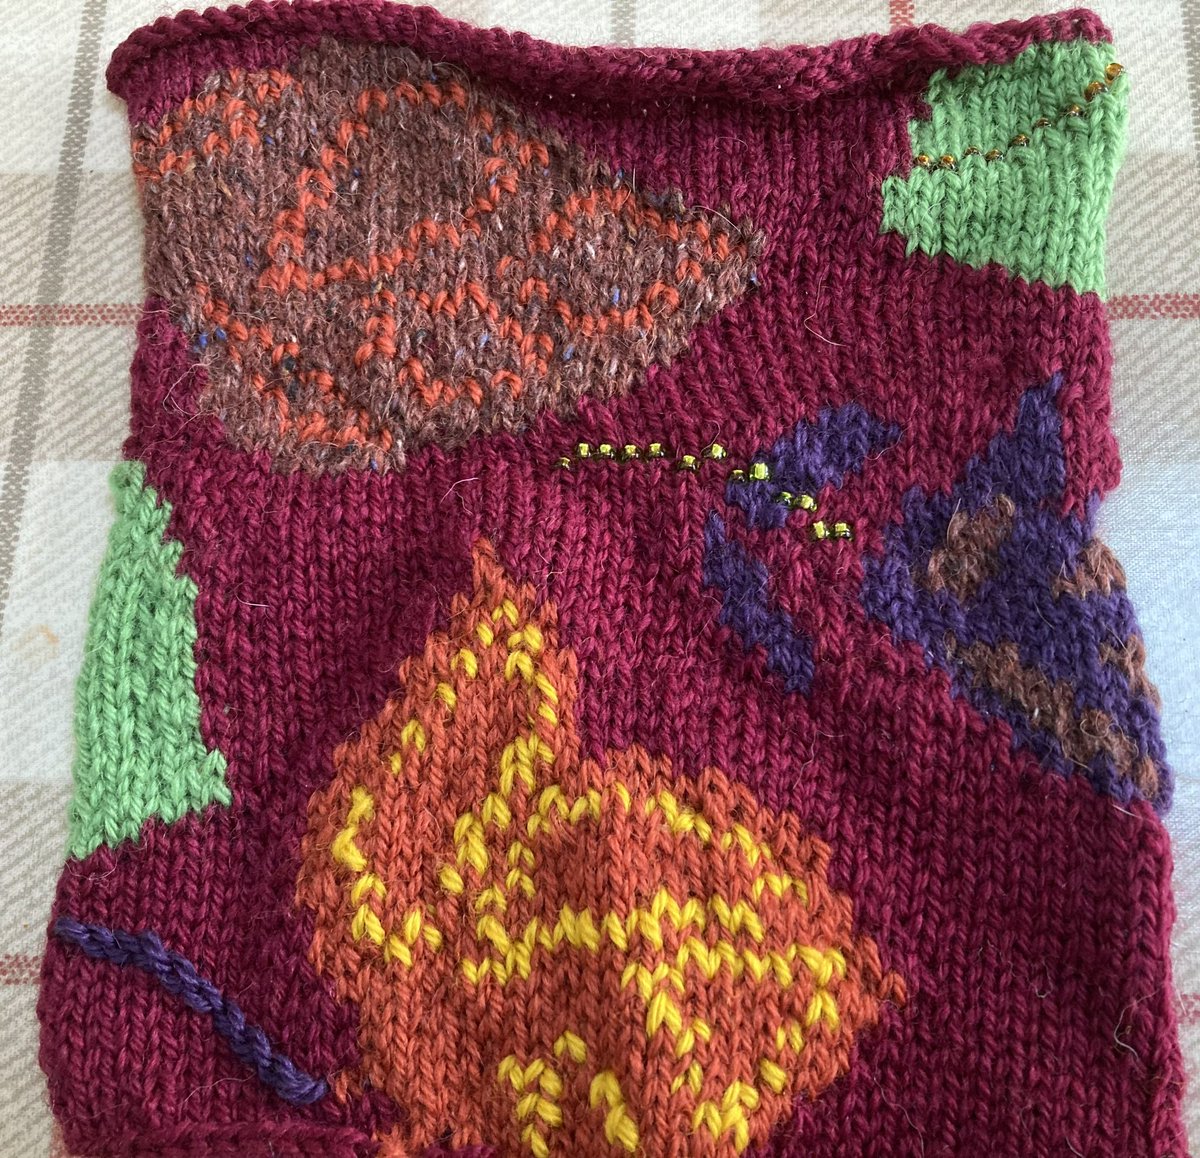 After spending Christmas knitting beanies I’ve returned to my Autumn themed blanket with an owl, leaves and butterflies. #Knitting #handmade #blanket